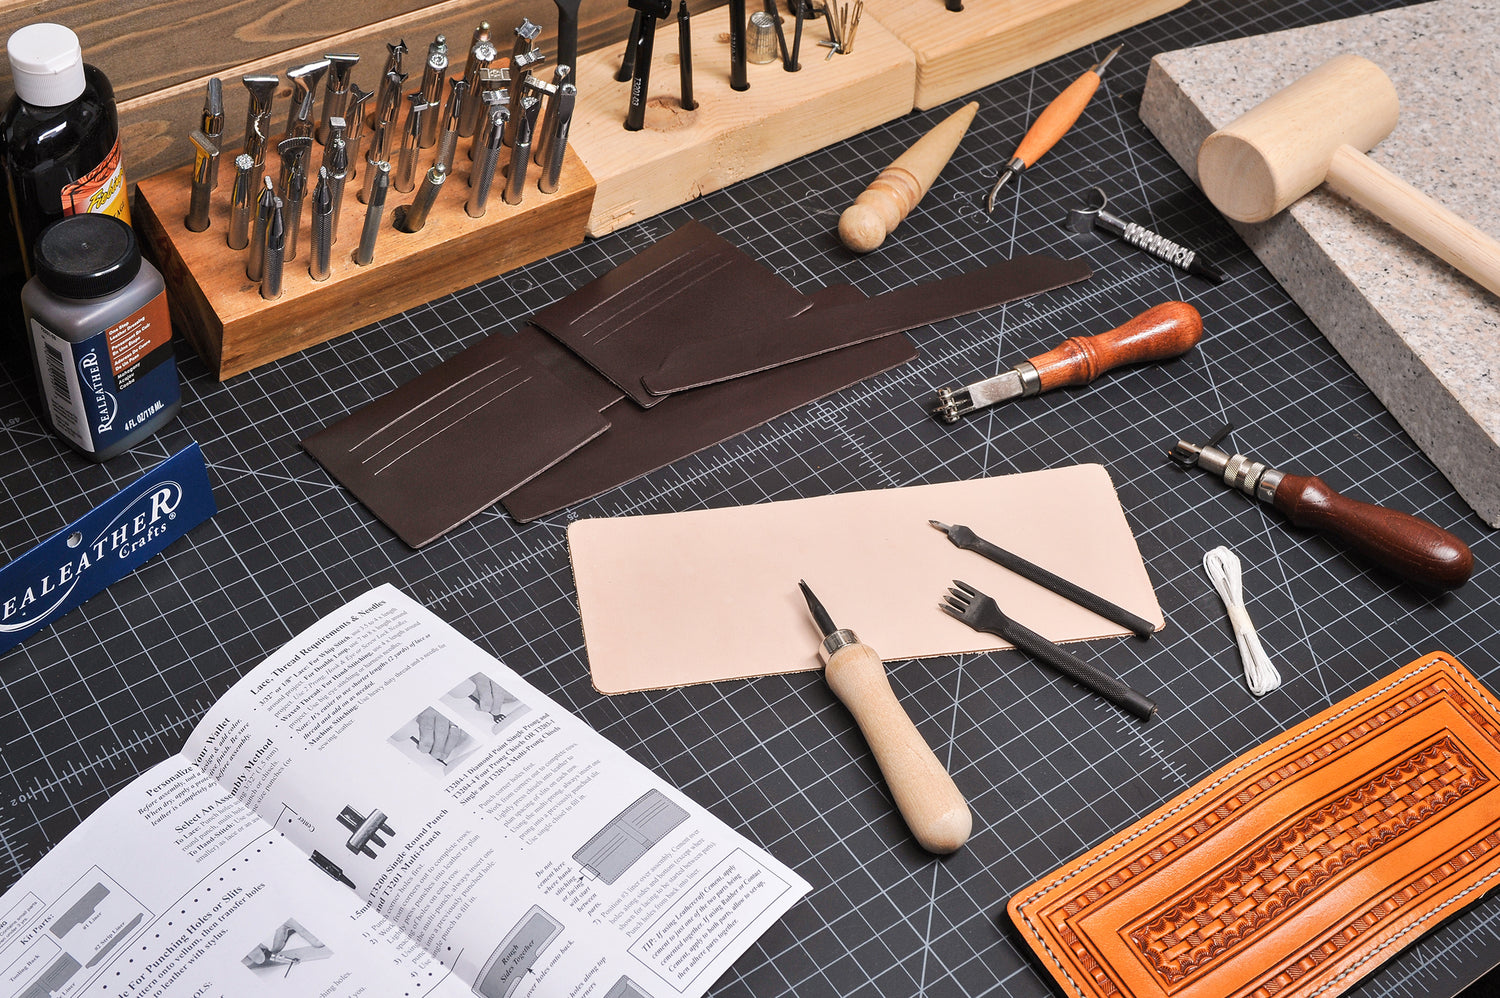 Get Started in Leather Crafting